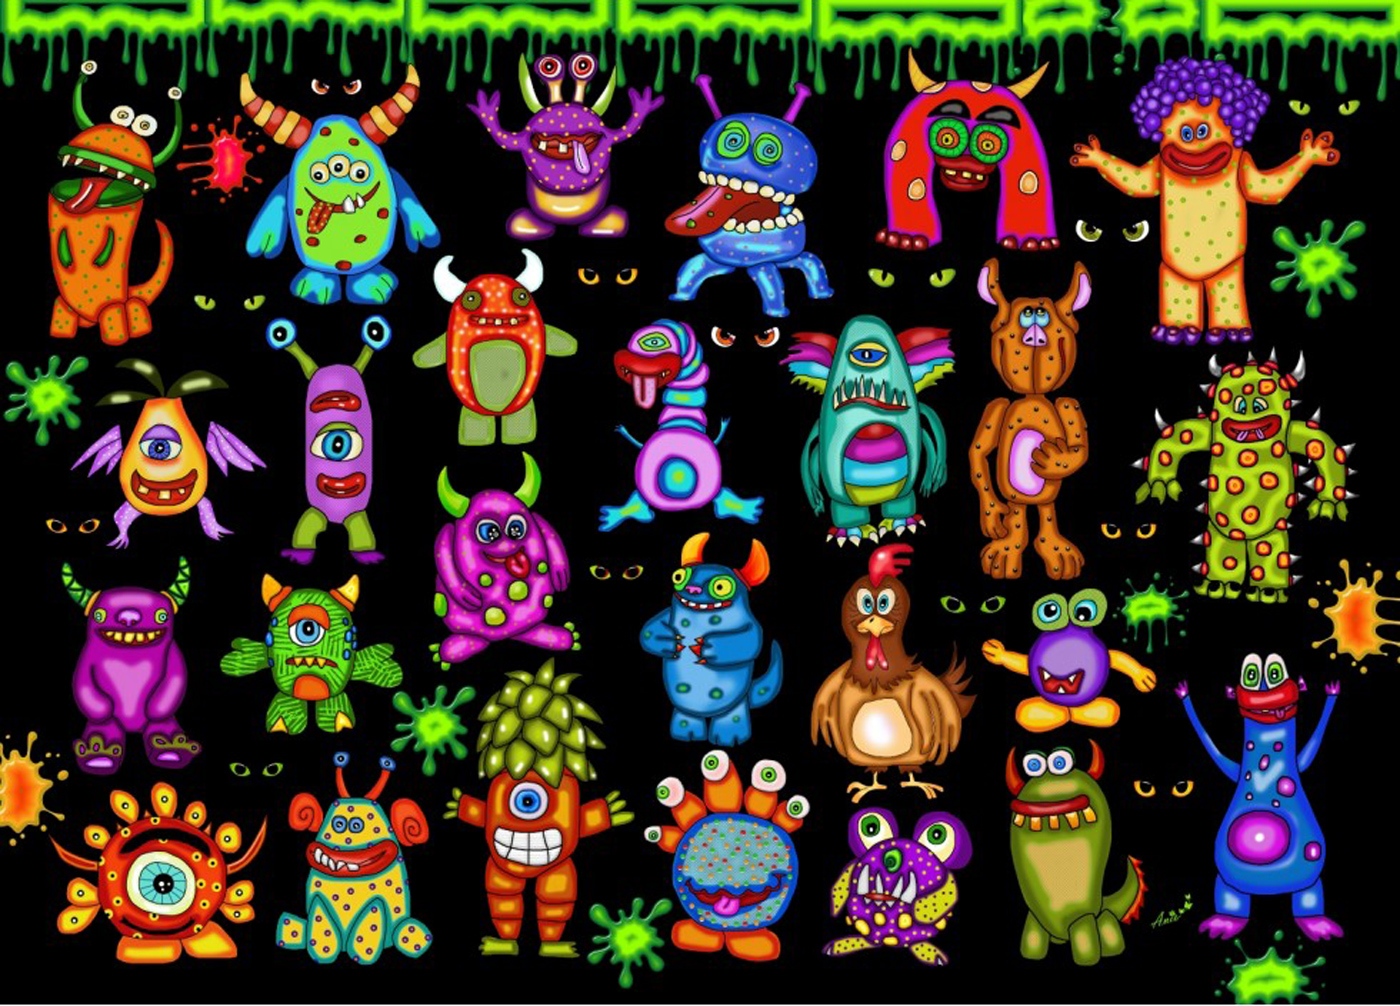 25 Little Monsters and One Chicken Fantasy Jigsaw Puzzle